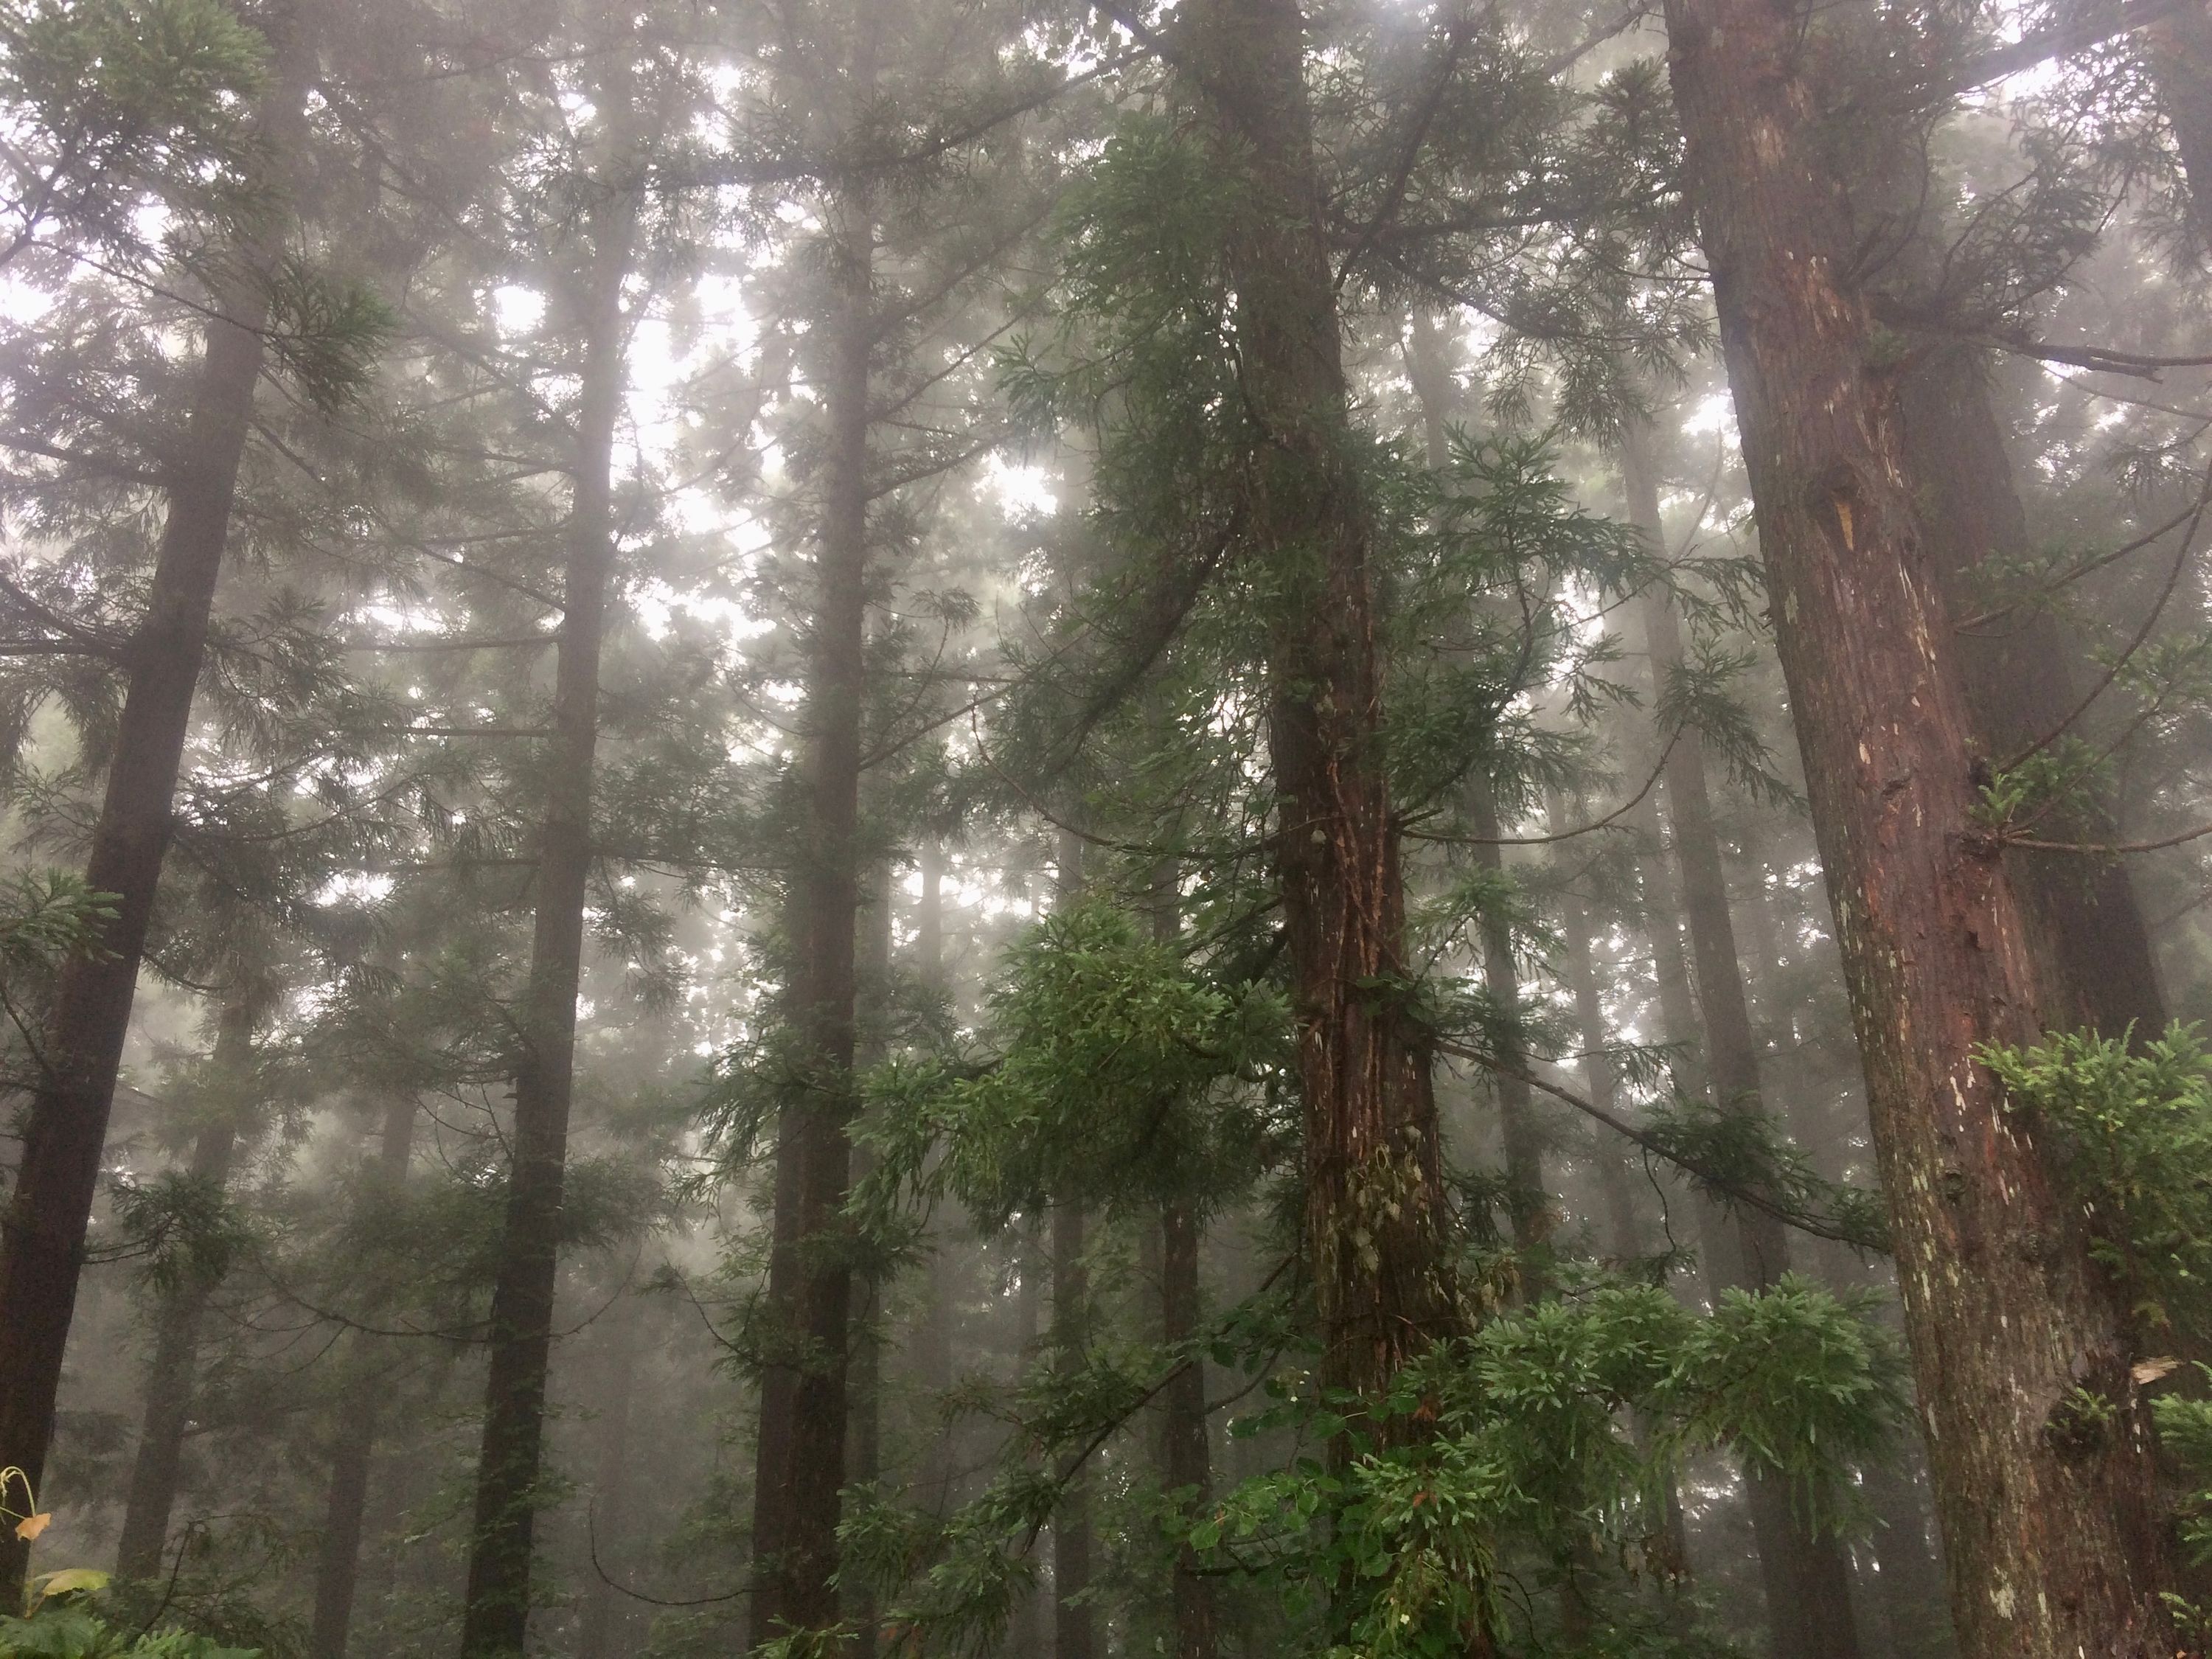 Looking at the tree trunks in a very gloomy cedar forest.